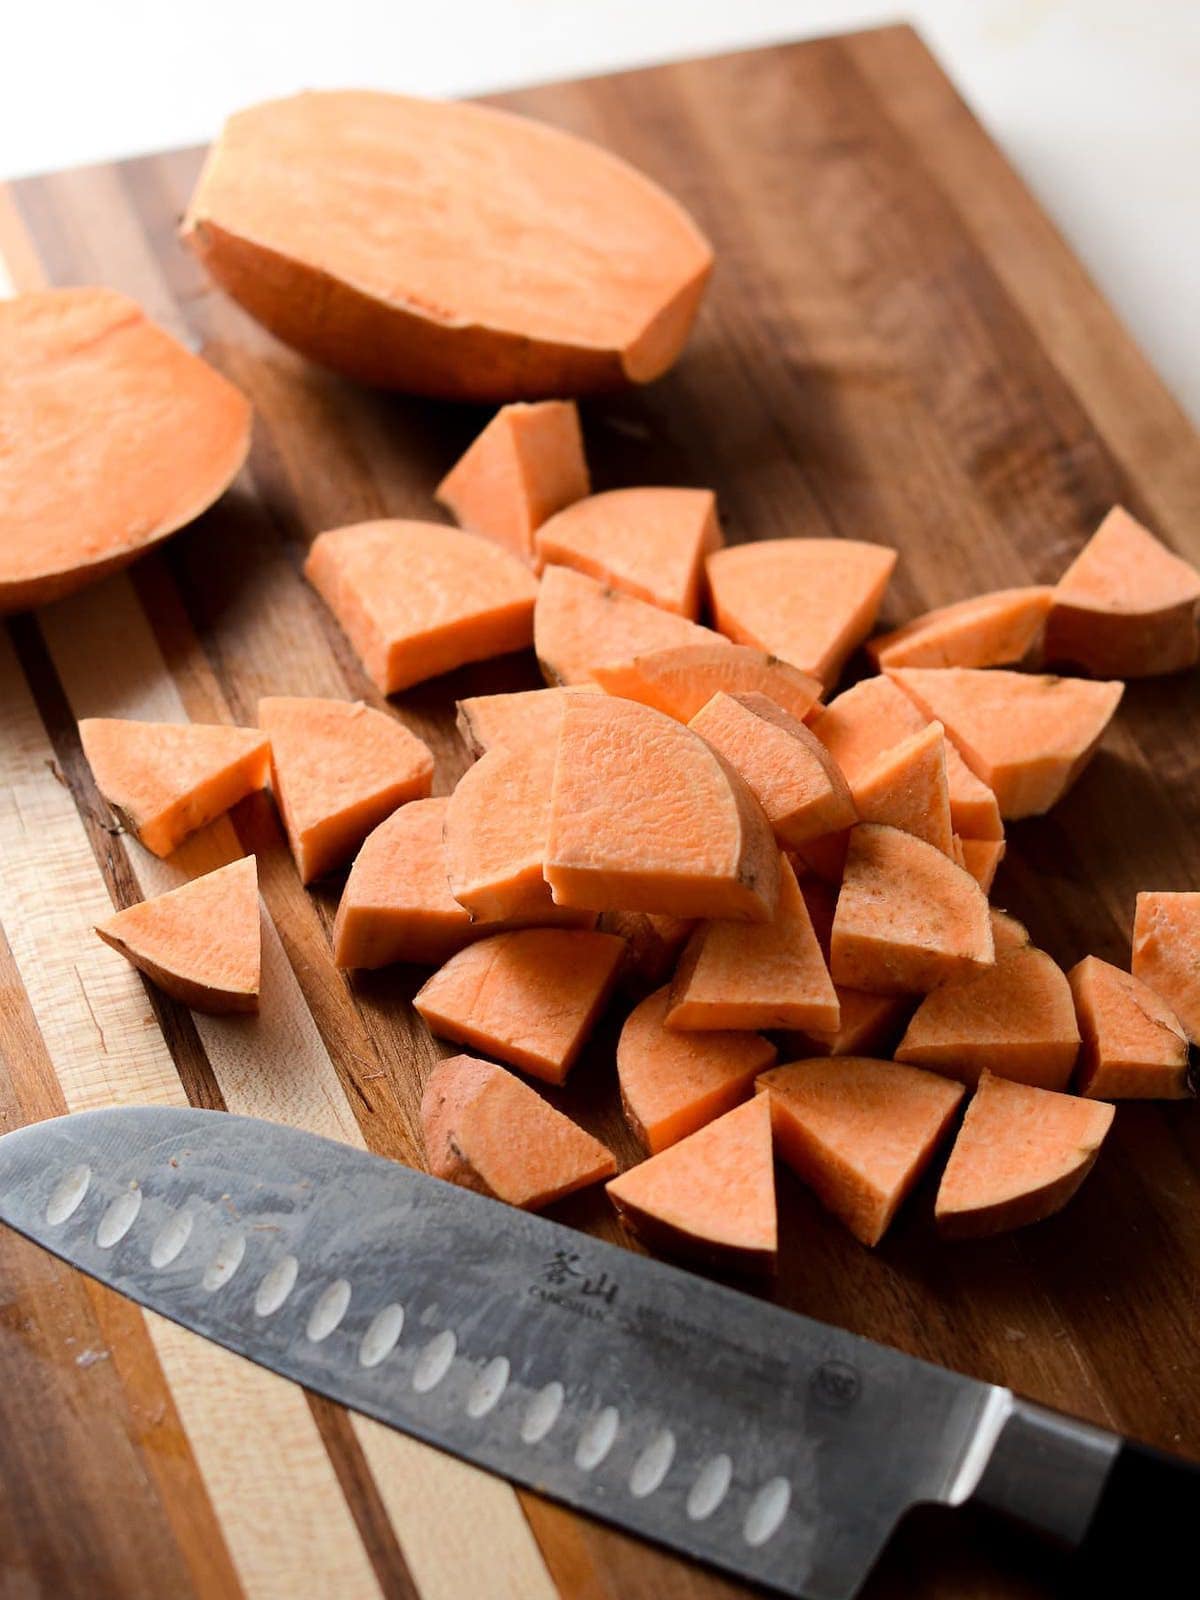 This is a photo of chopped sweet potatoes.